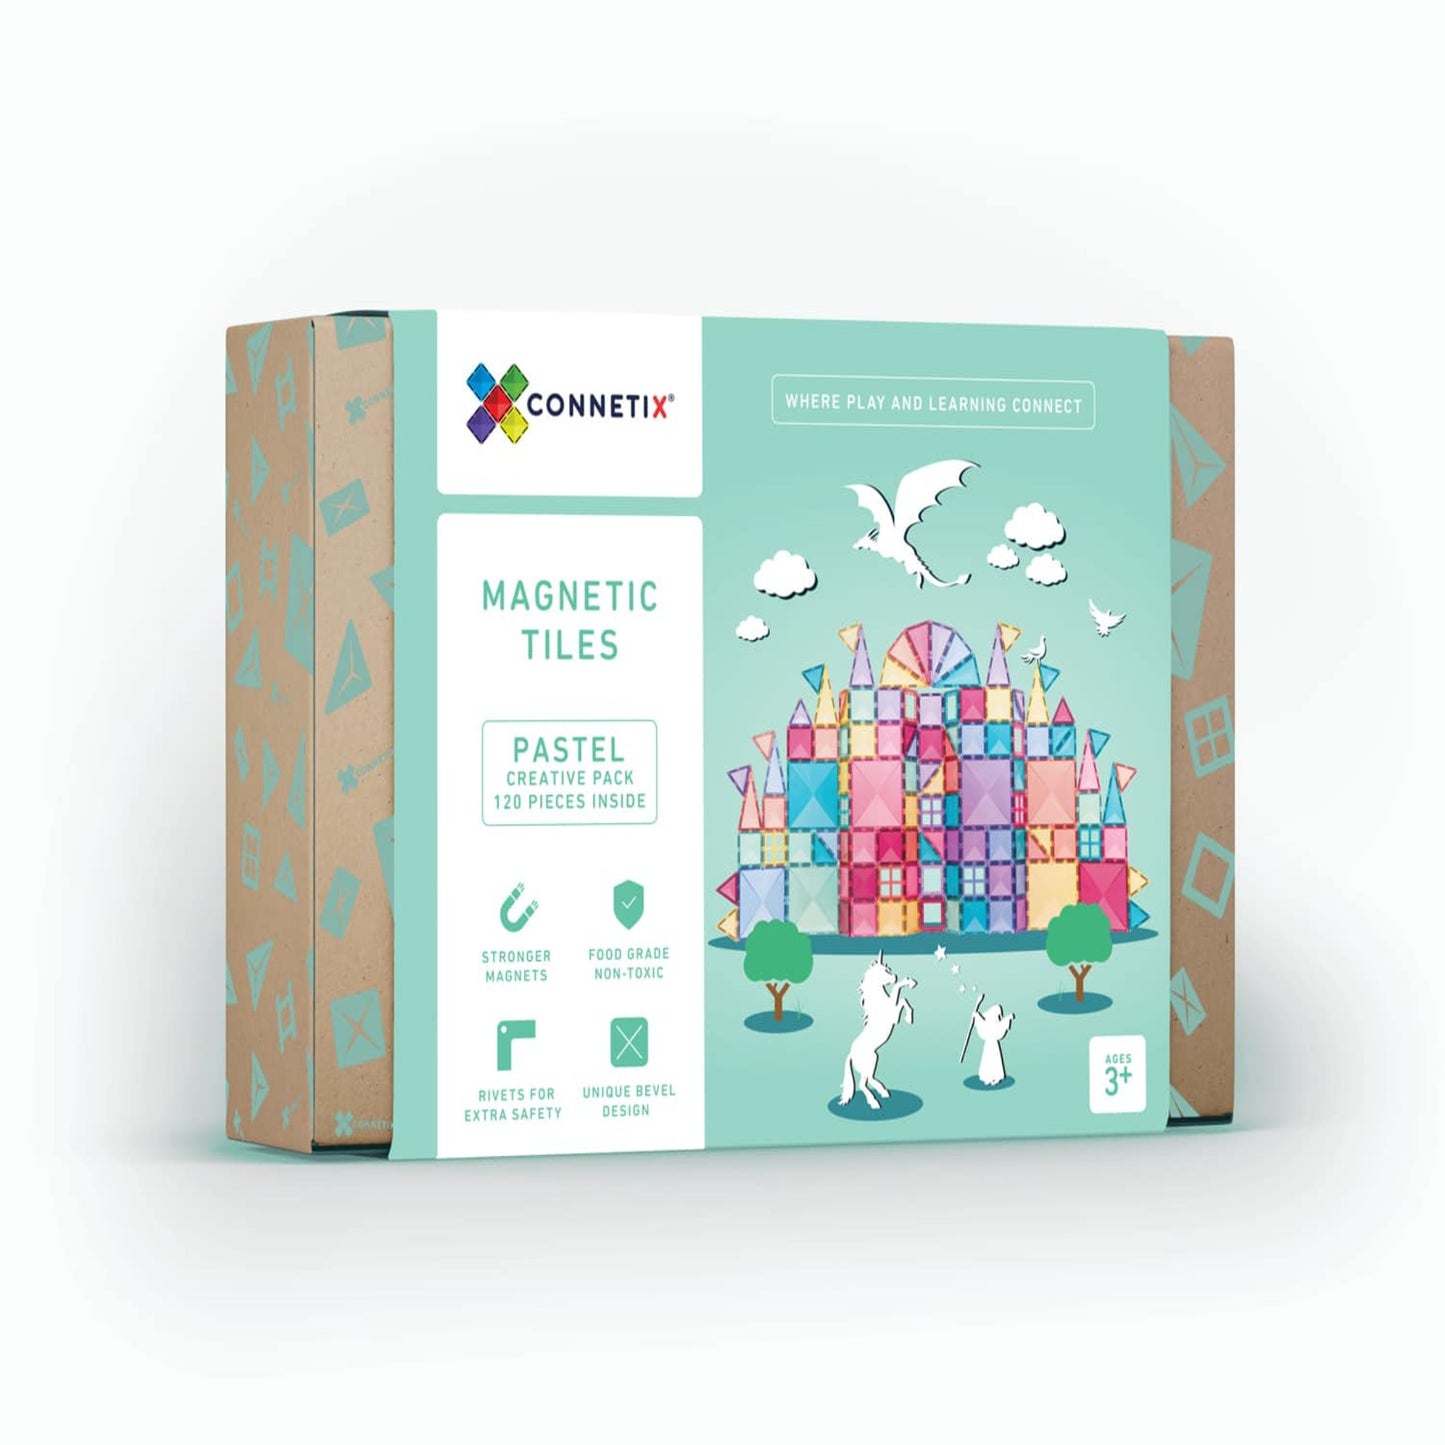 Magnetic Tiles - 120 Piece Pastel Creative Pack